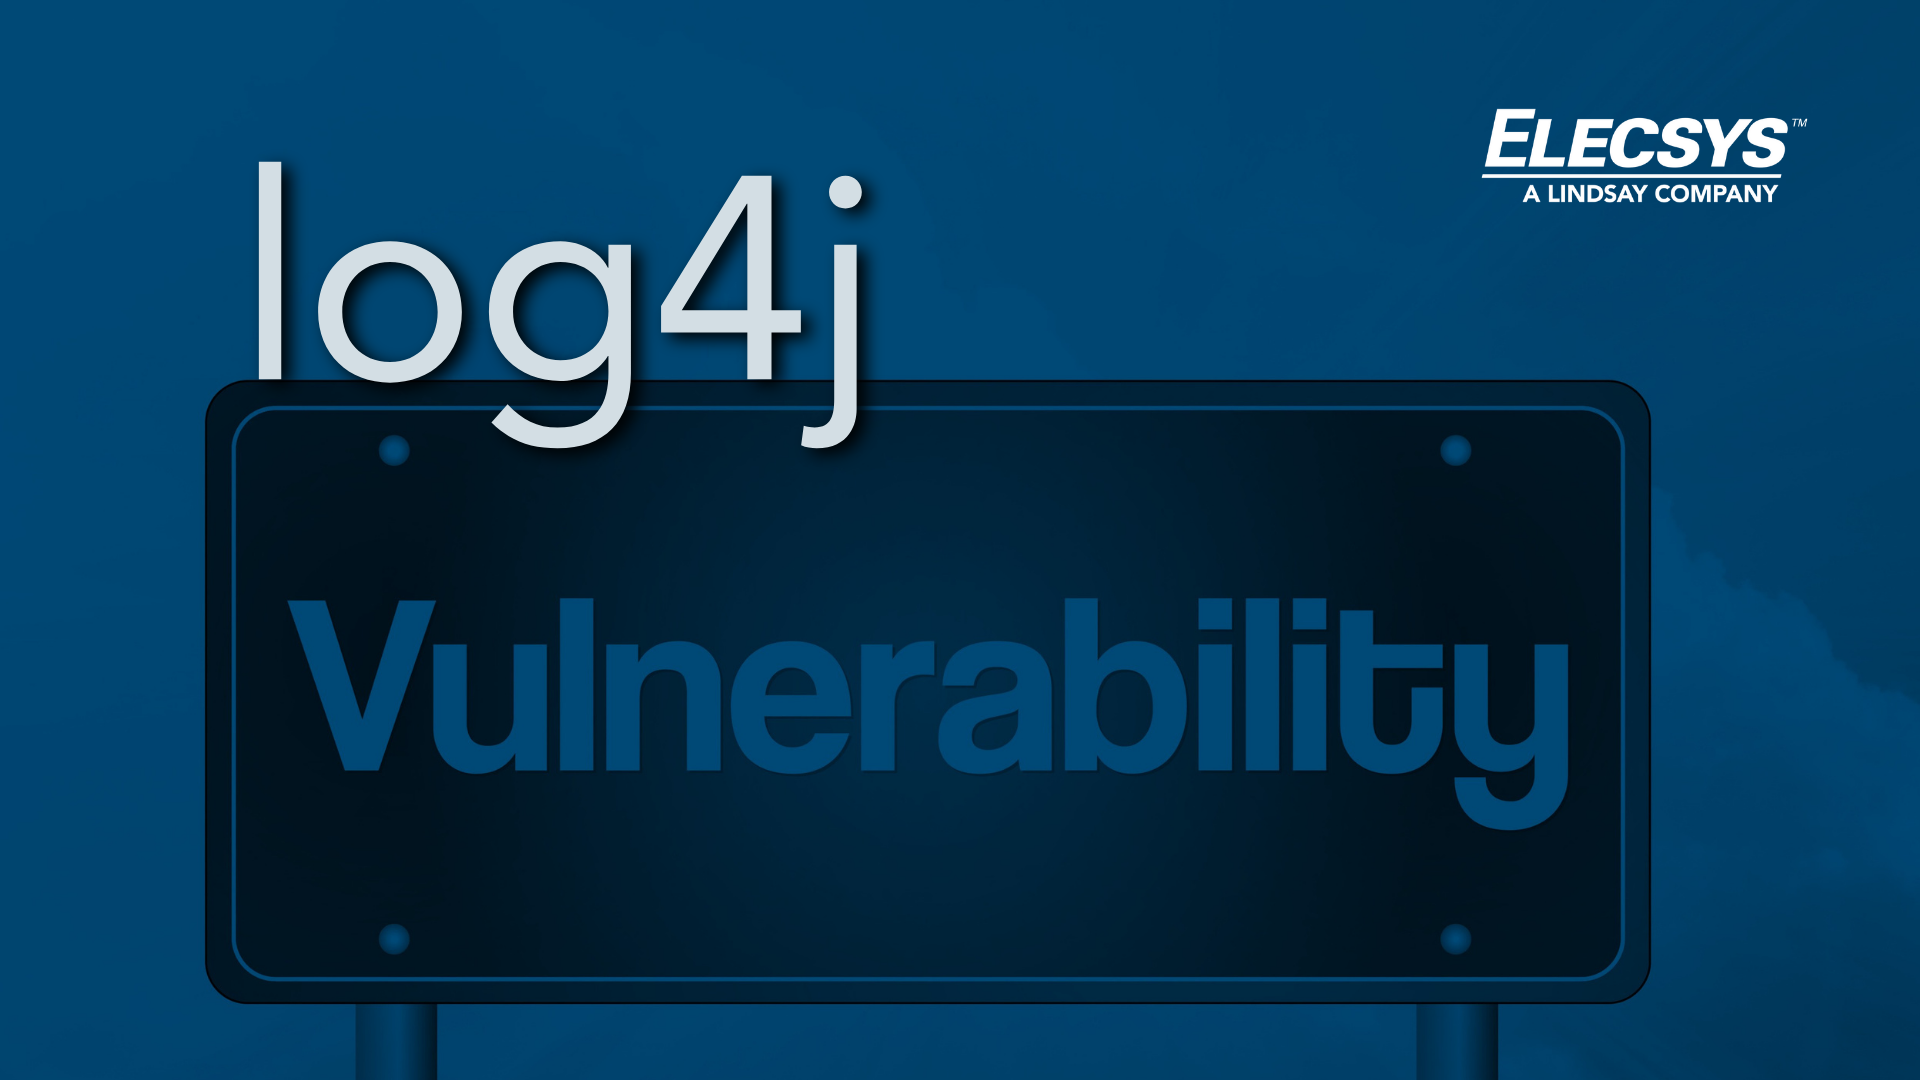 log4j Vulnerability - Are You At Risk?